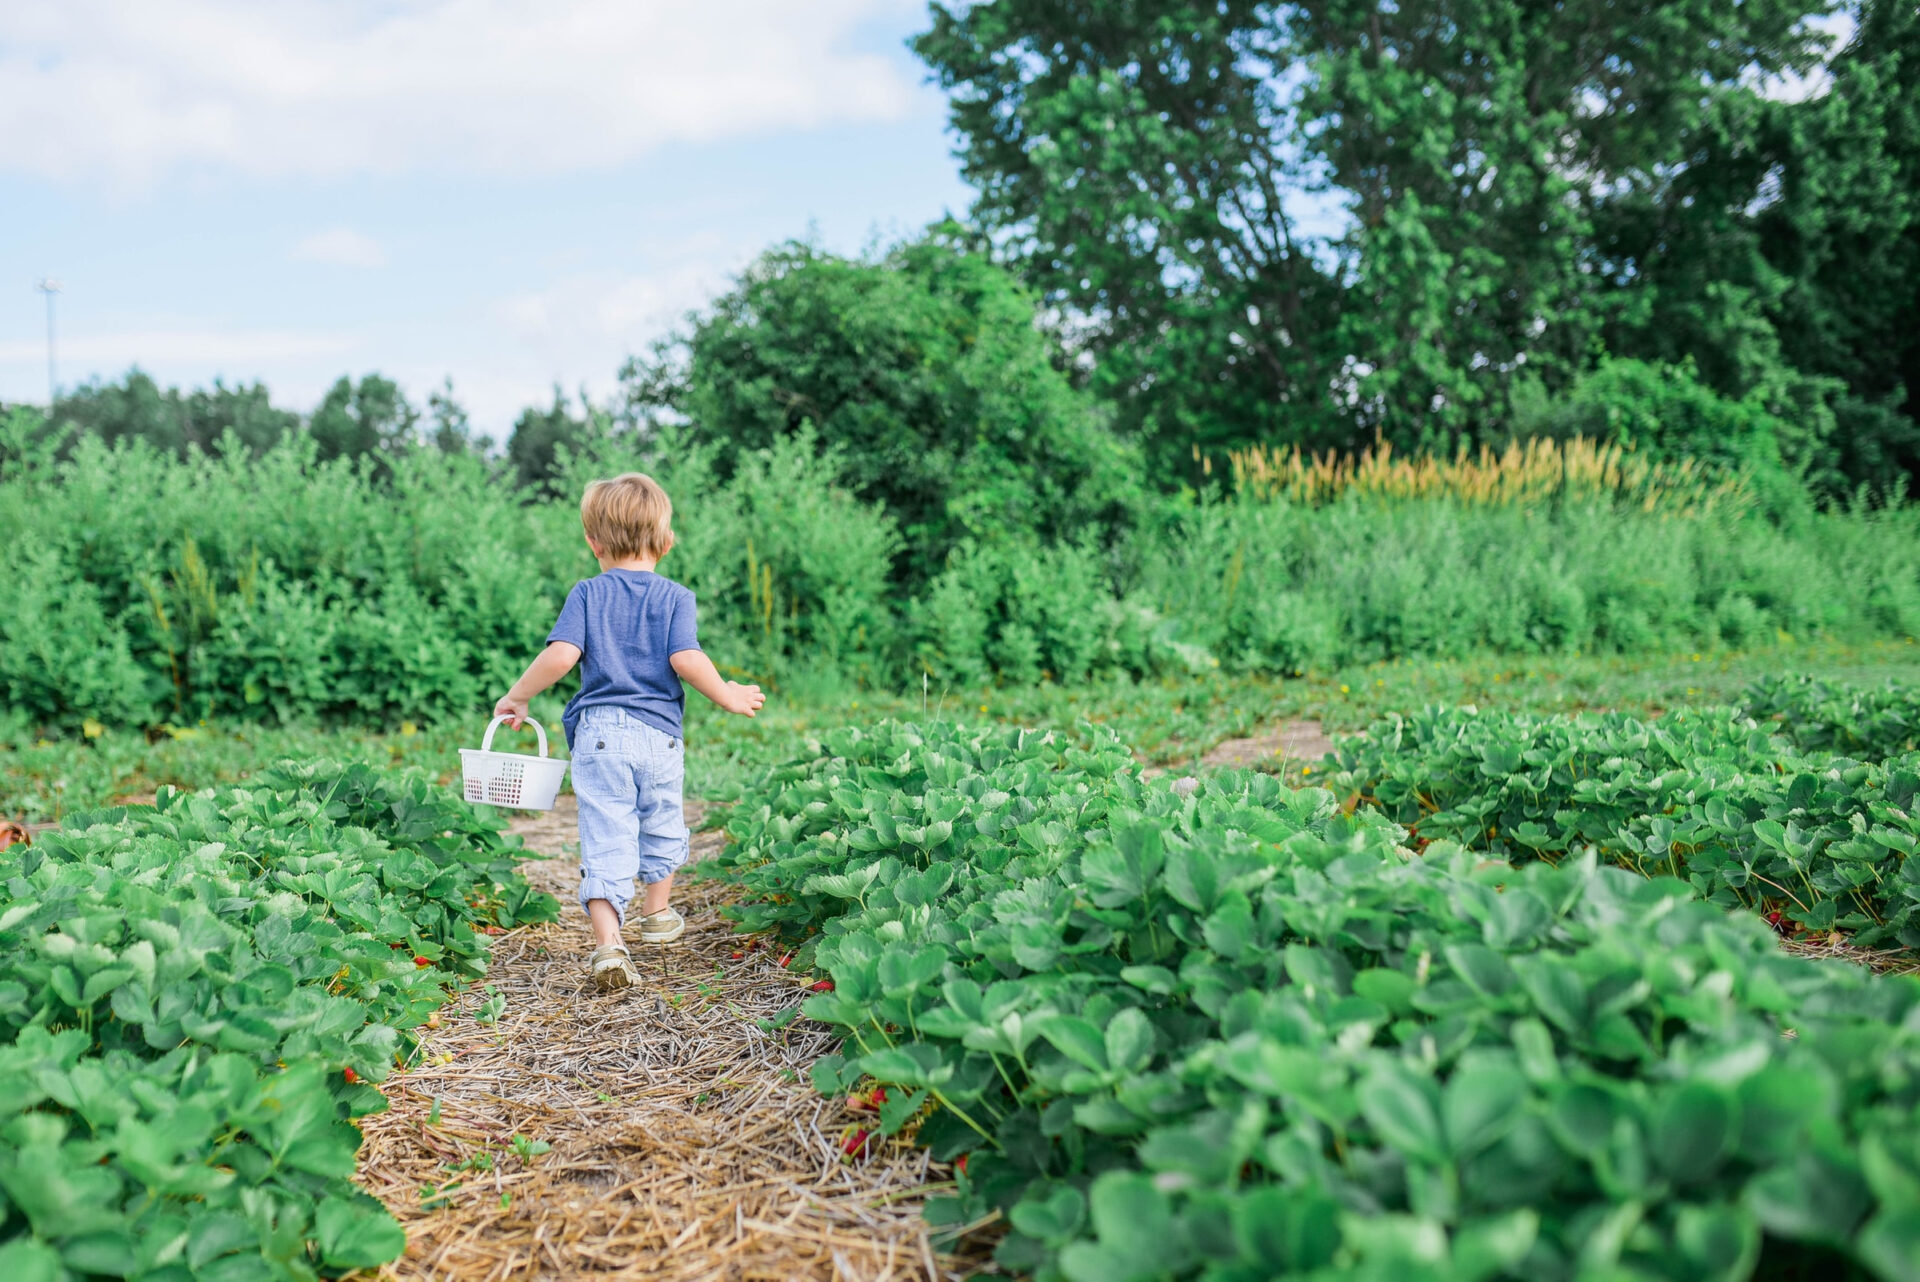 kids running through vegetable patch with basket